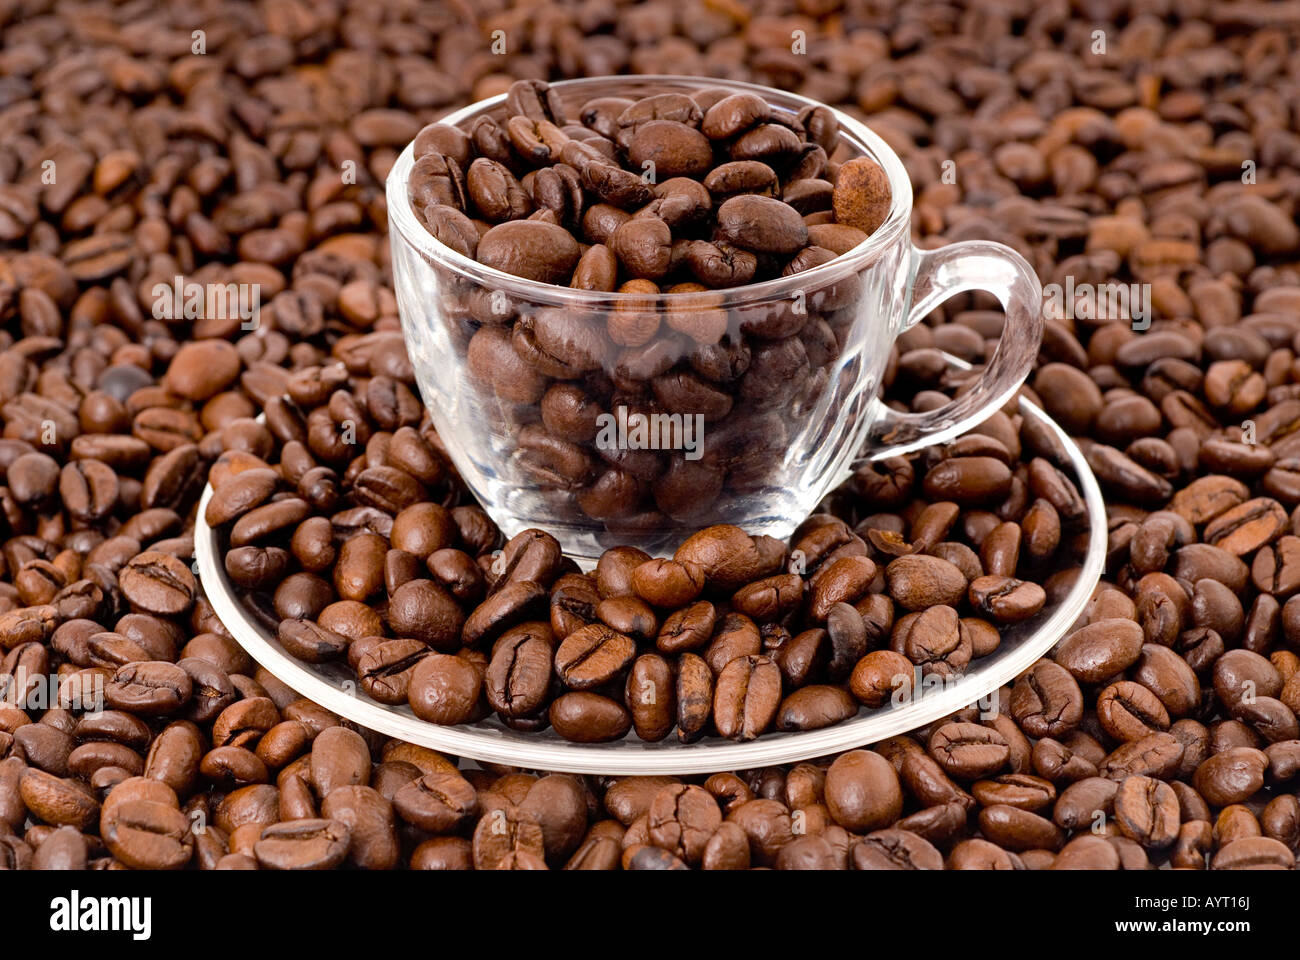 Coffee beans in a glass espresso cup Stock Photo